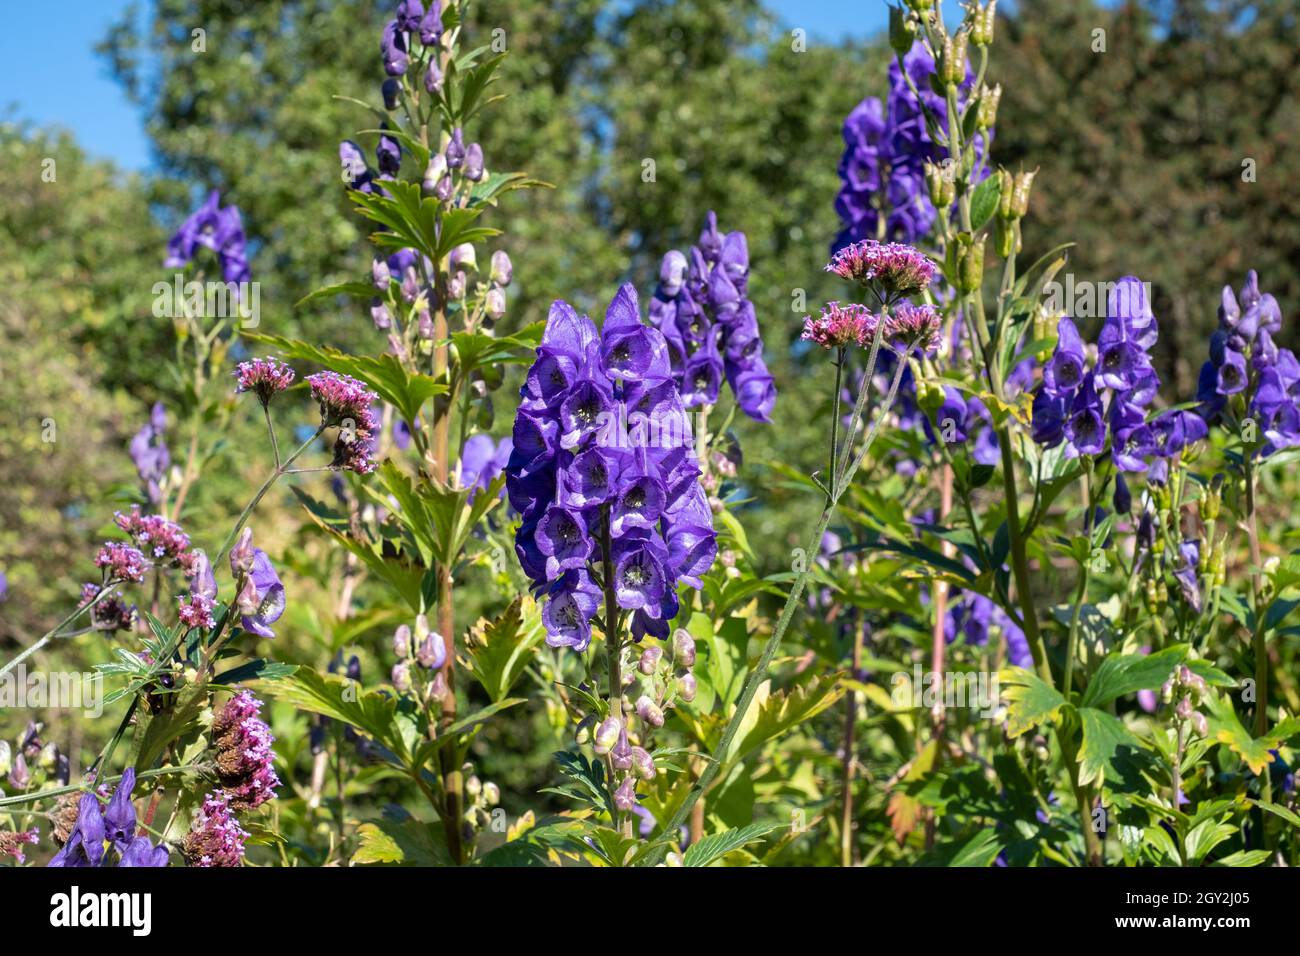 Purple Aconitum Volubile flowers, photographed in autumn in the St John's Lodge garden, located in the Inner Circle, Regent's Park, London UK Stock Photo